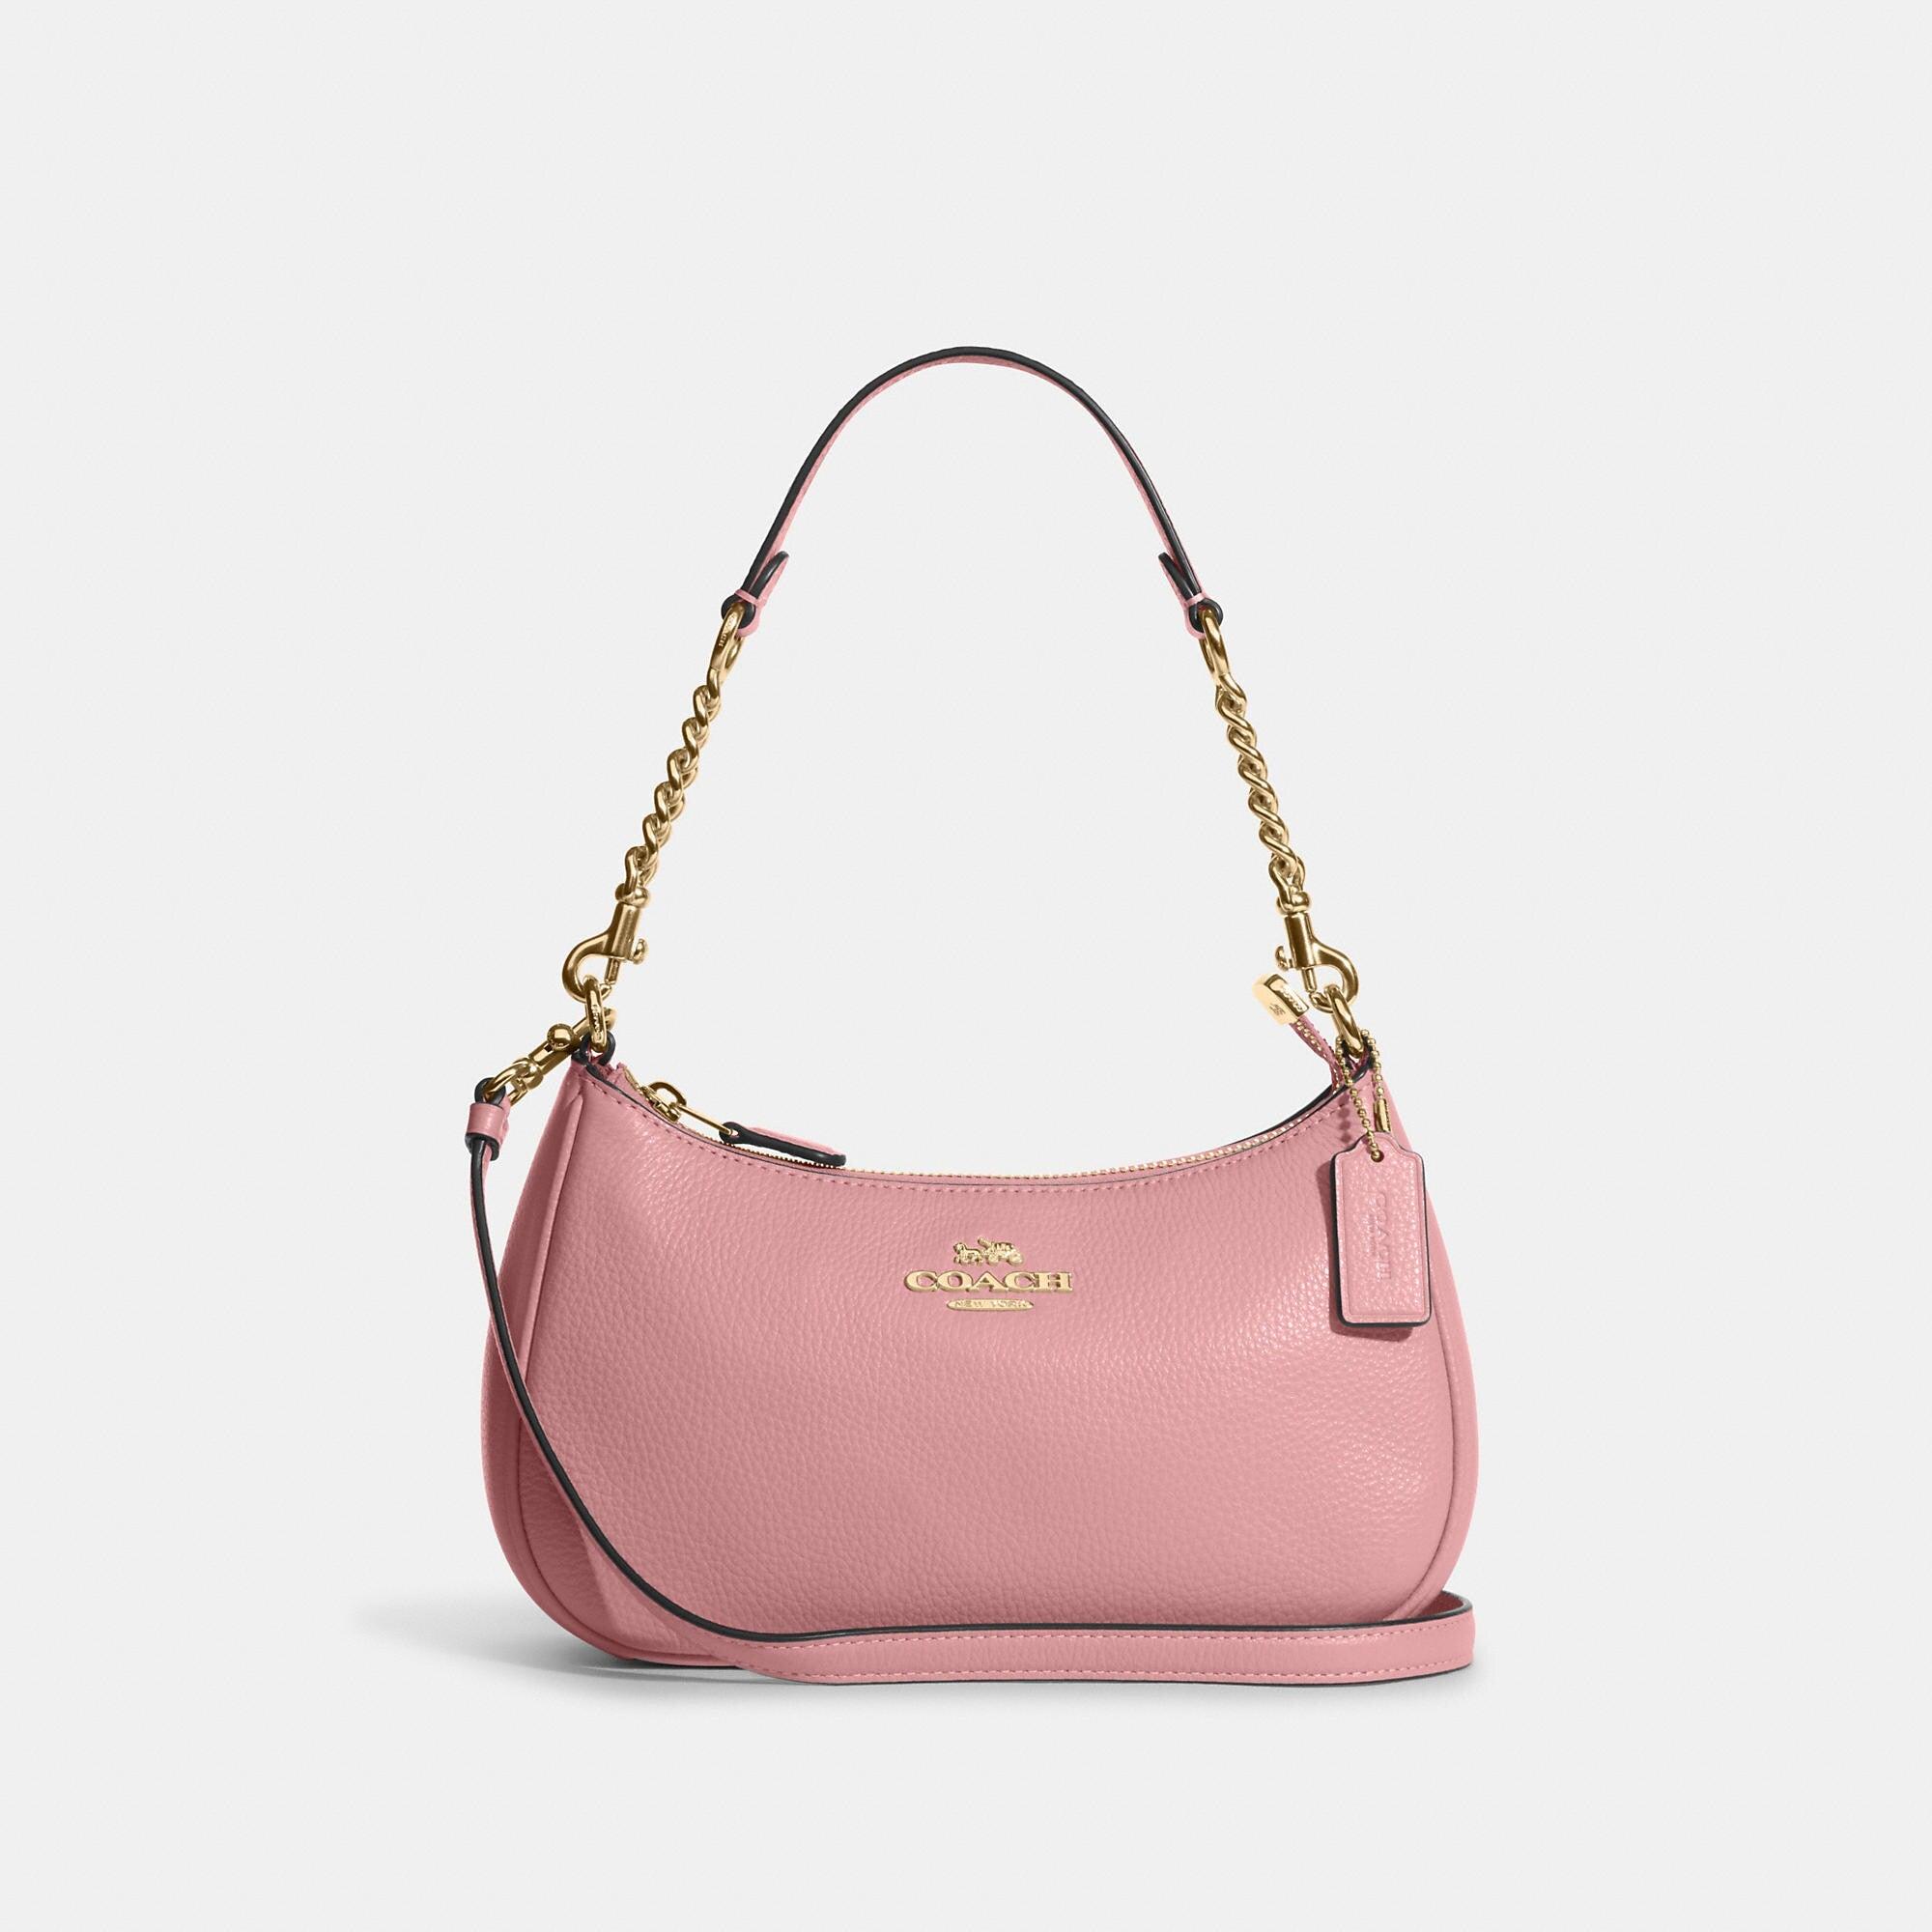 These 15 Coach bags are 60% off or more, plus an extra 20% off